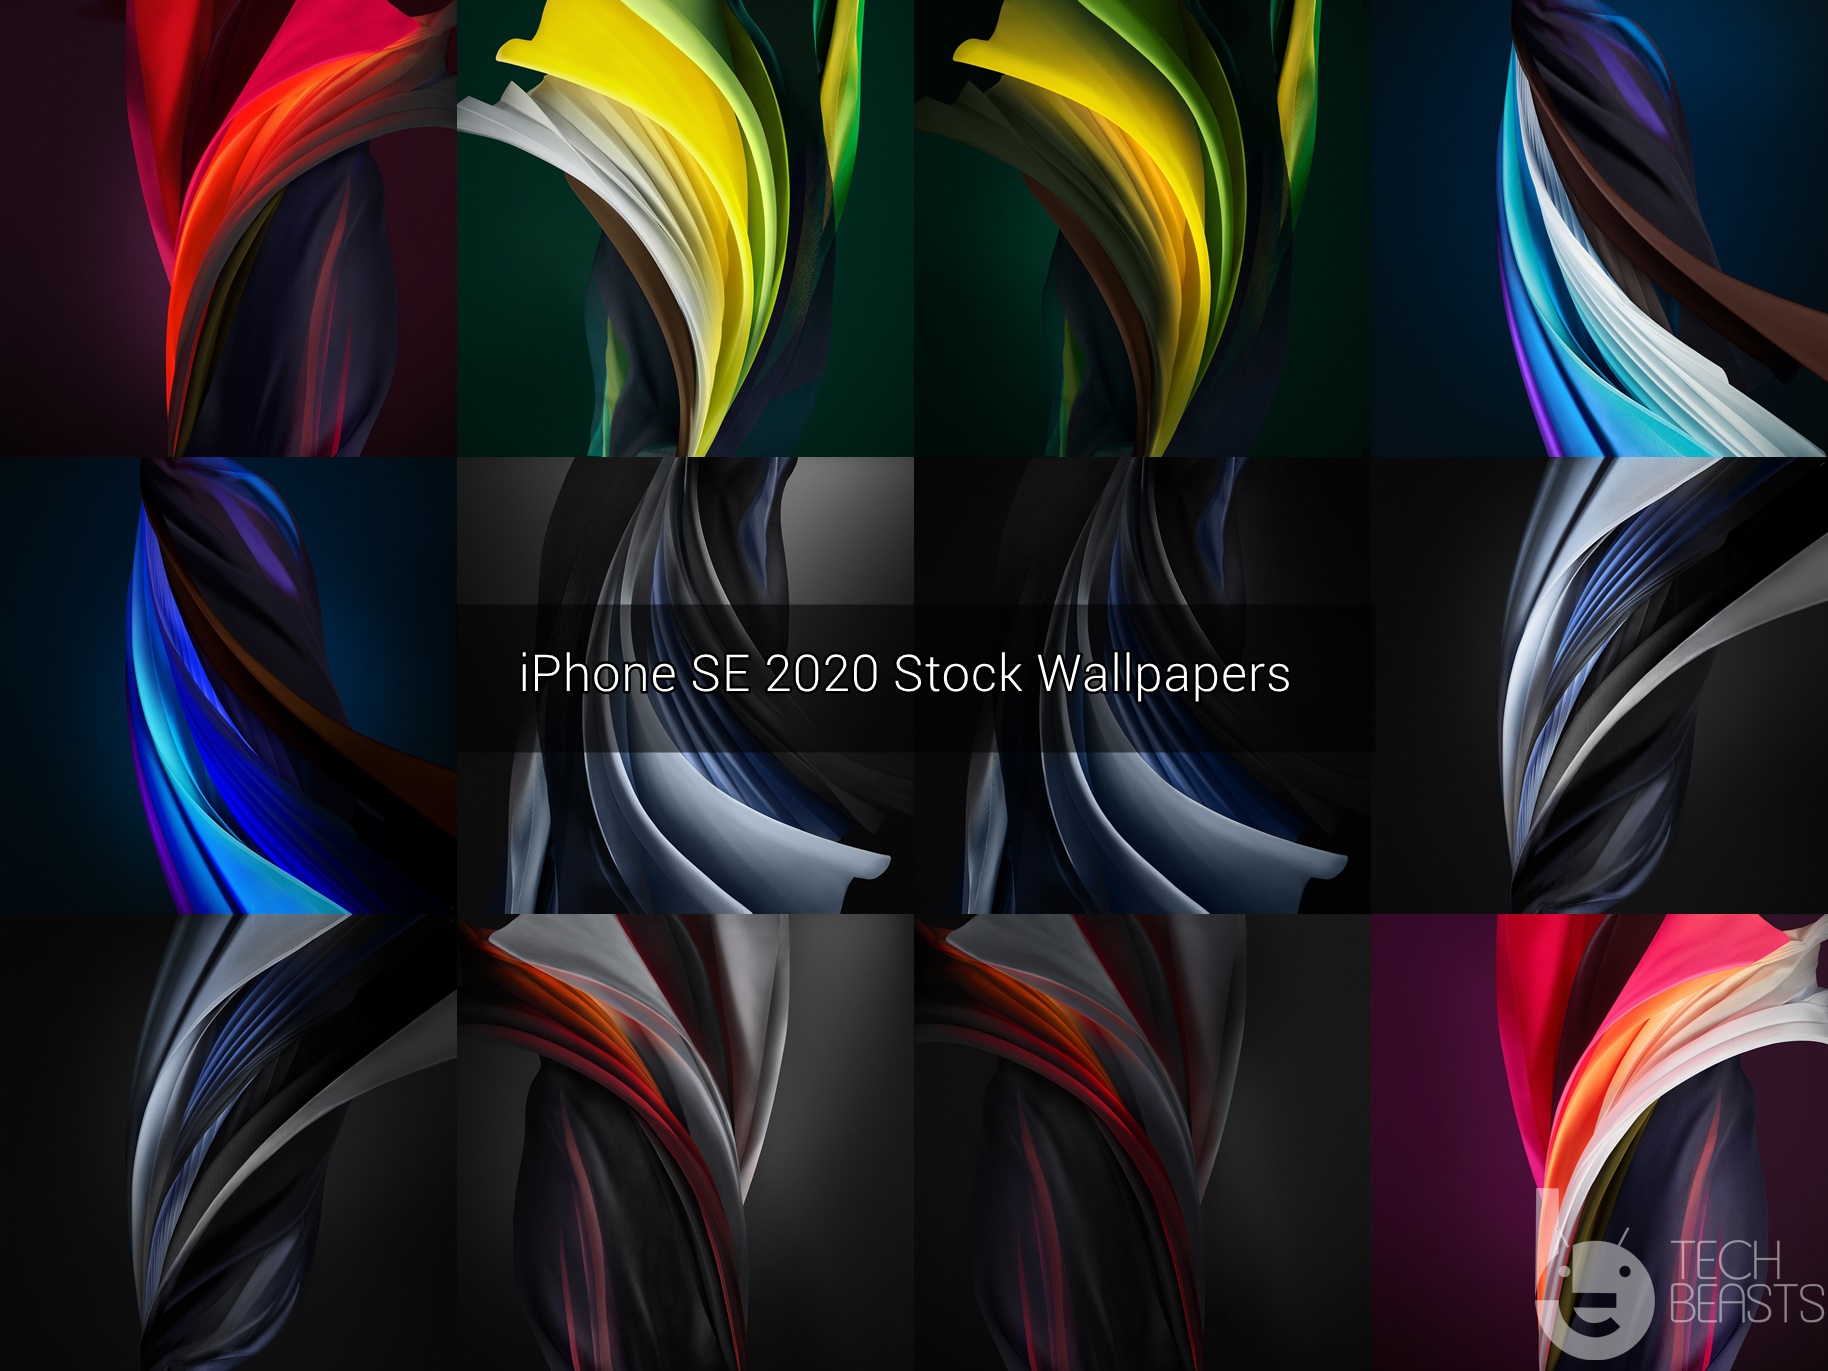 Iphone Se 2020 Stock Wallpapers - Iphone 2020 Wallpaper Stock , HD Wallpaper & Backgrounds